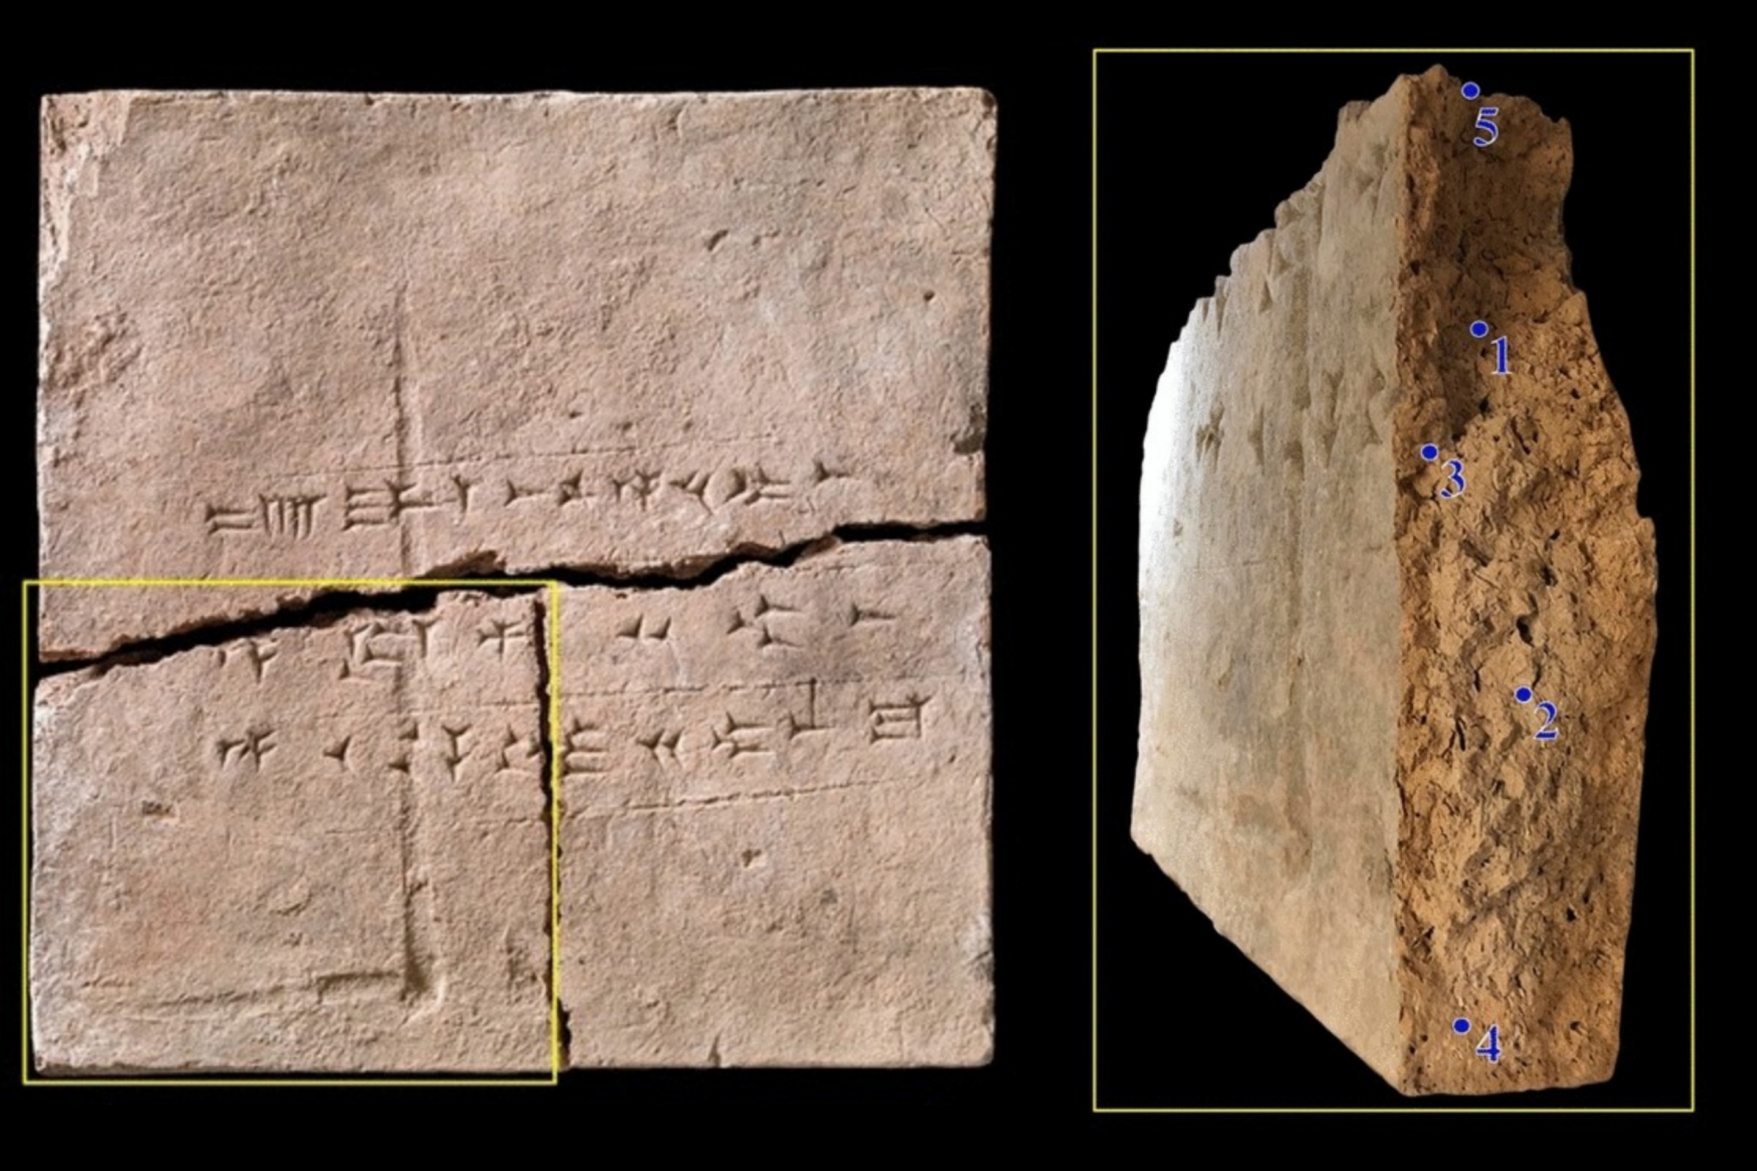 The clay brick from which the samples derived. Pictures of the clay brick from the National Museum of Denmark (museum number 13854) and the five sampling points on the surface of the break. The yellow square in the left part of the figure represents the piece of the brick illustrated on the right.